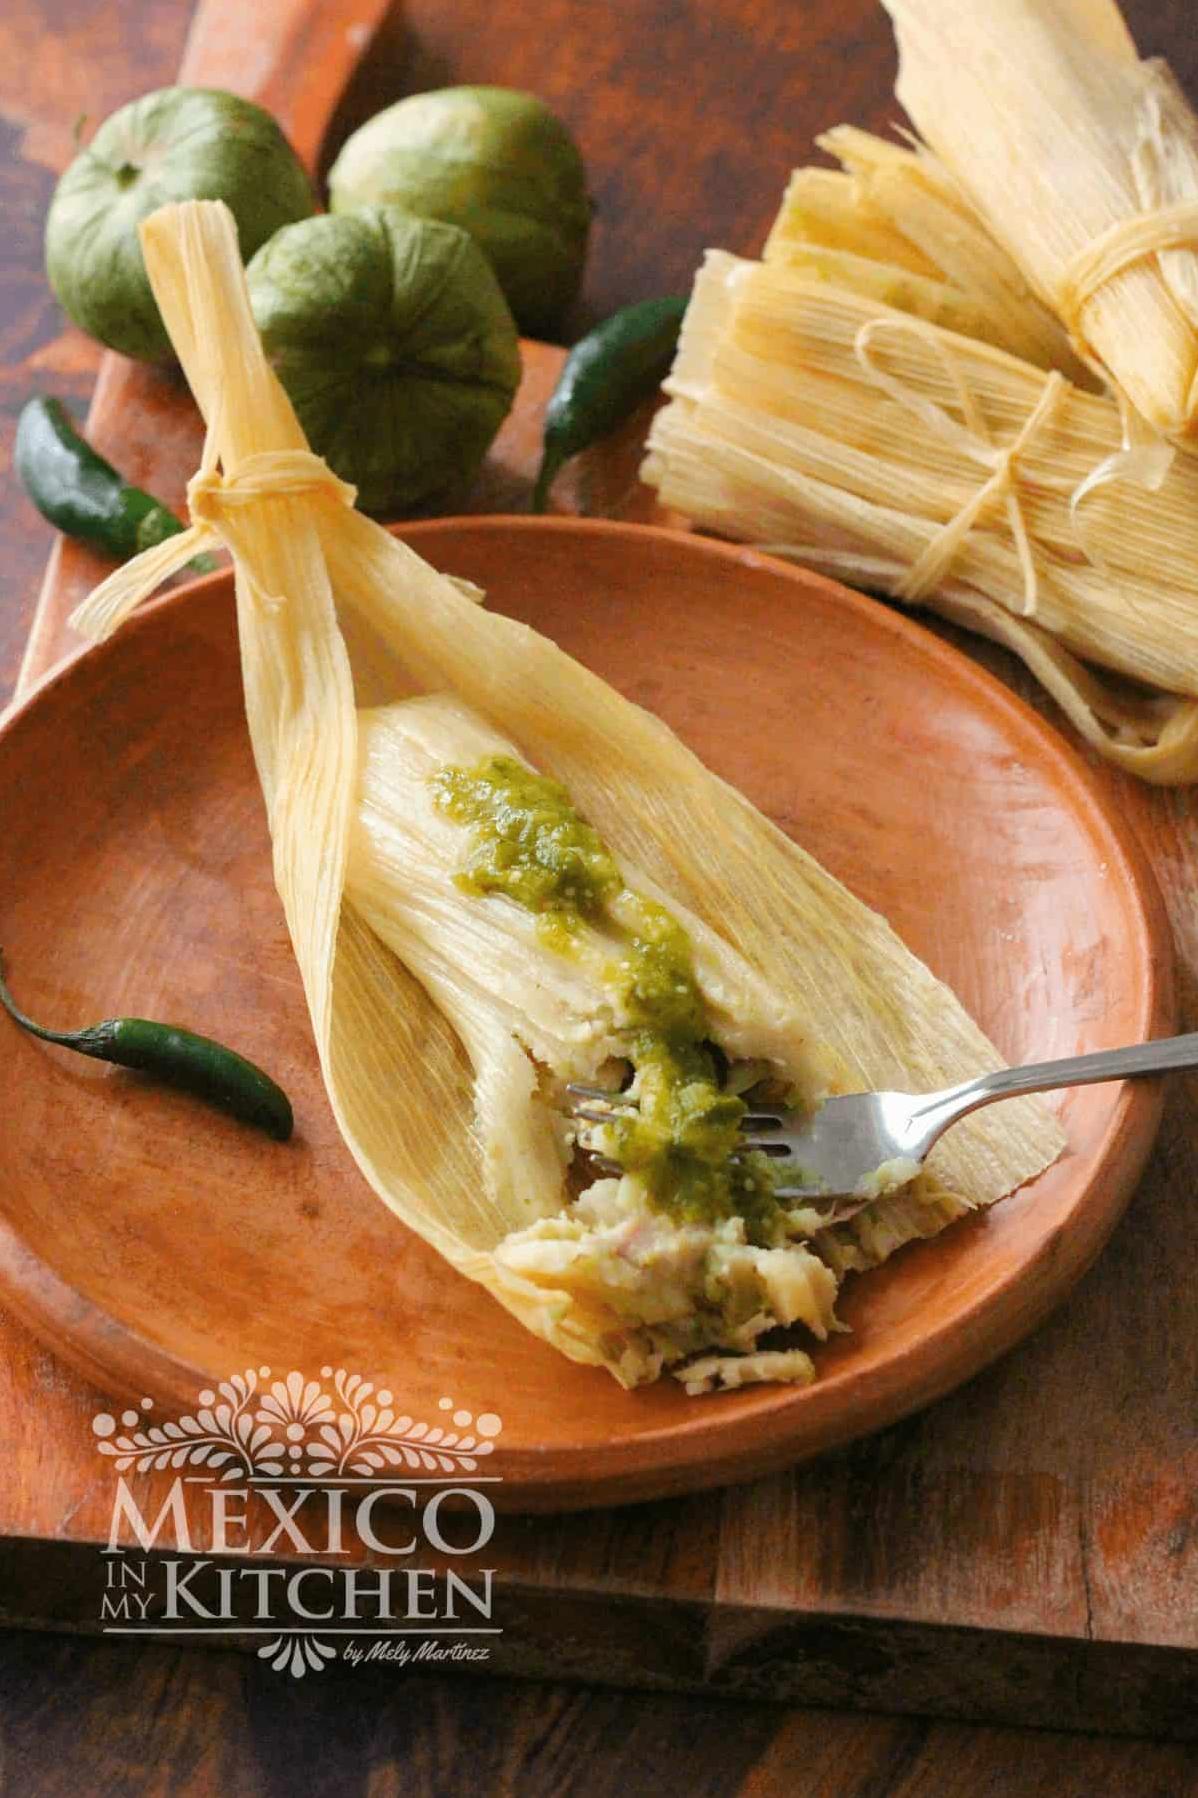  Bite into a world of flavor with our delicious tamales!